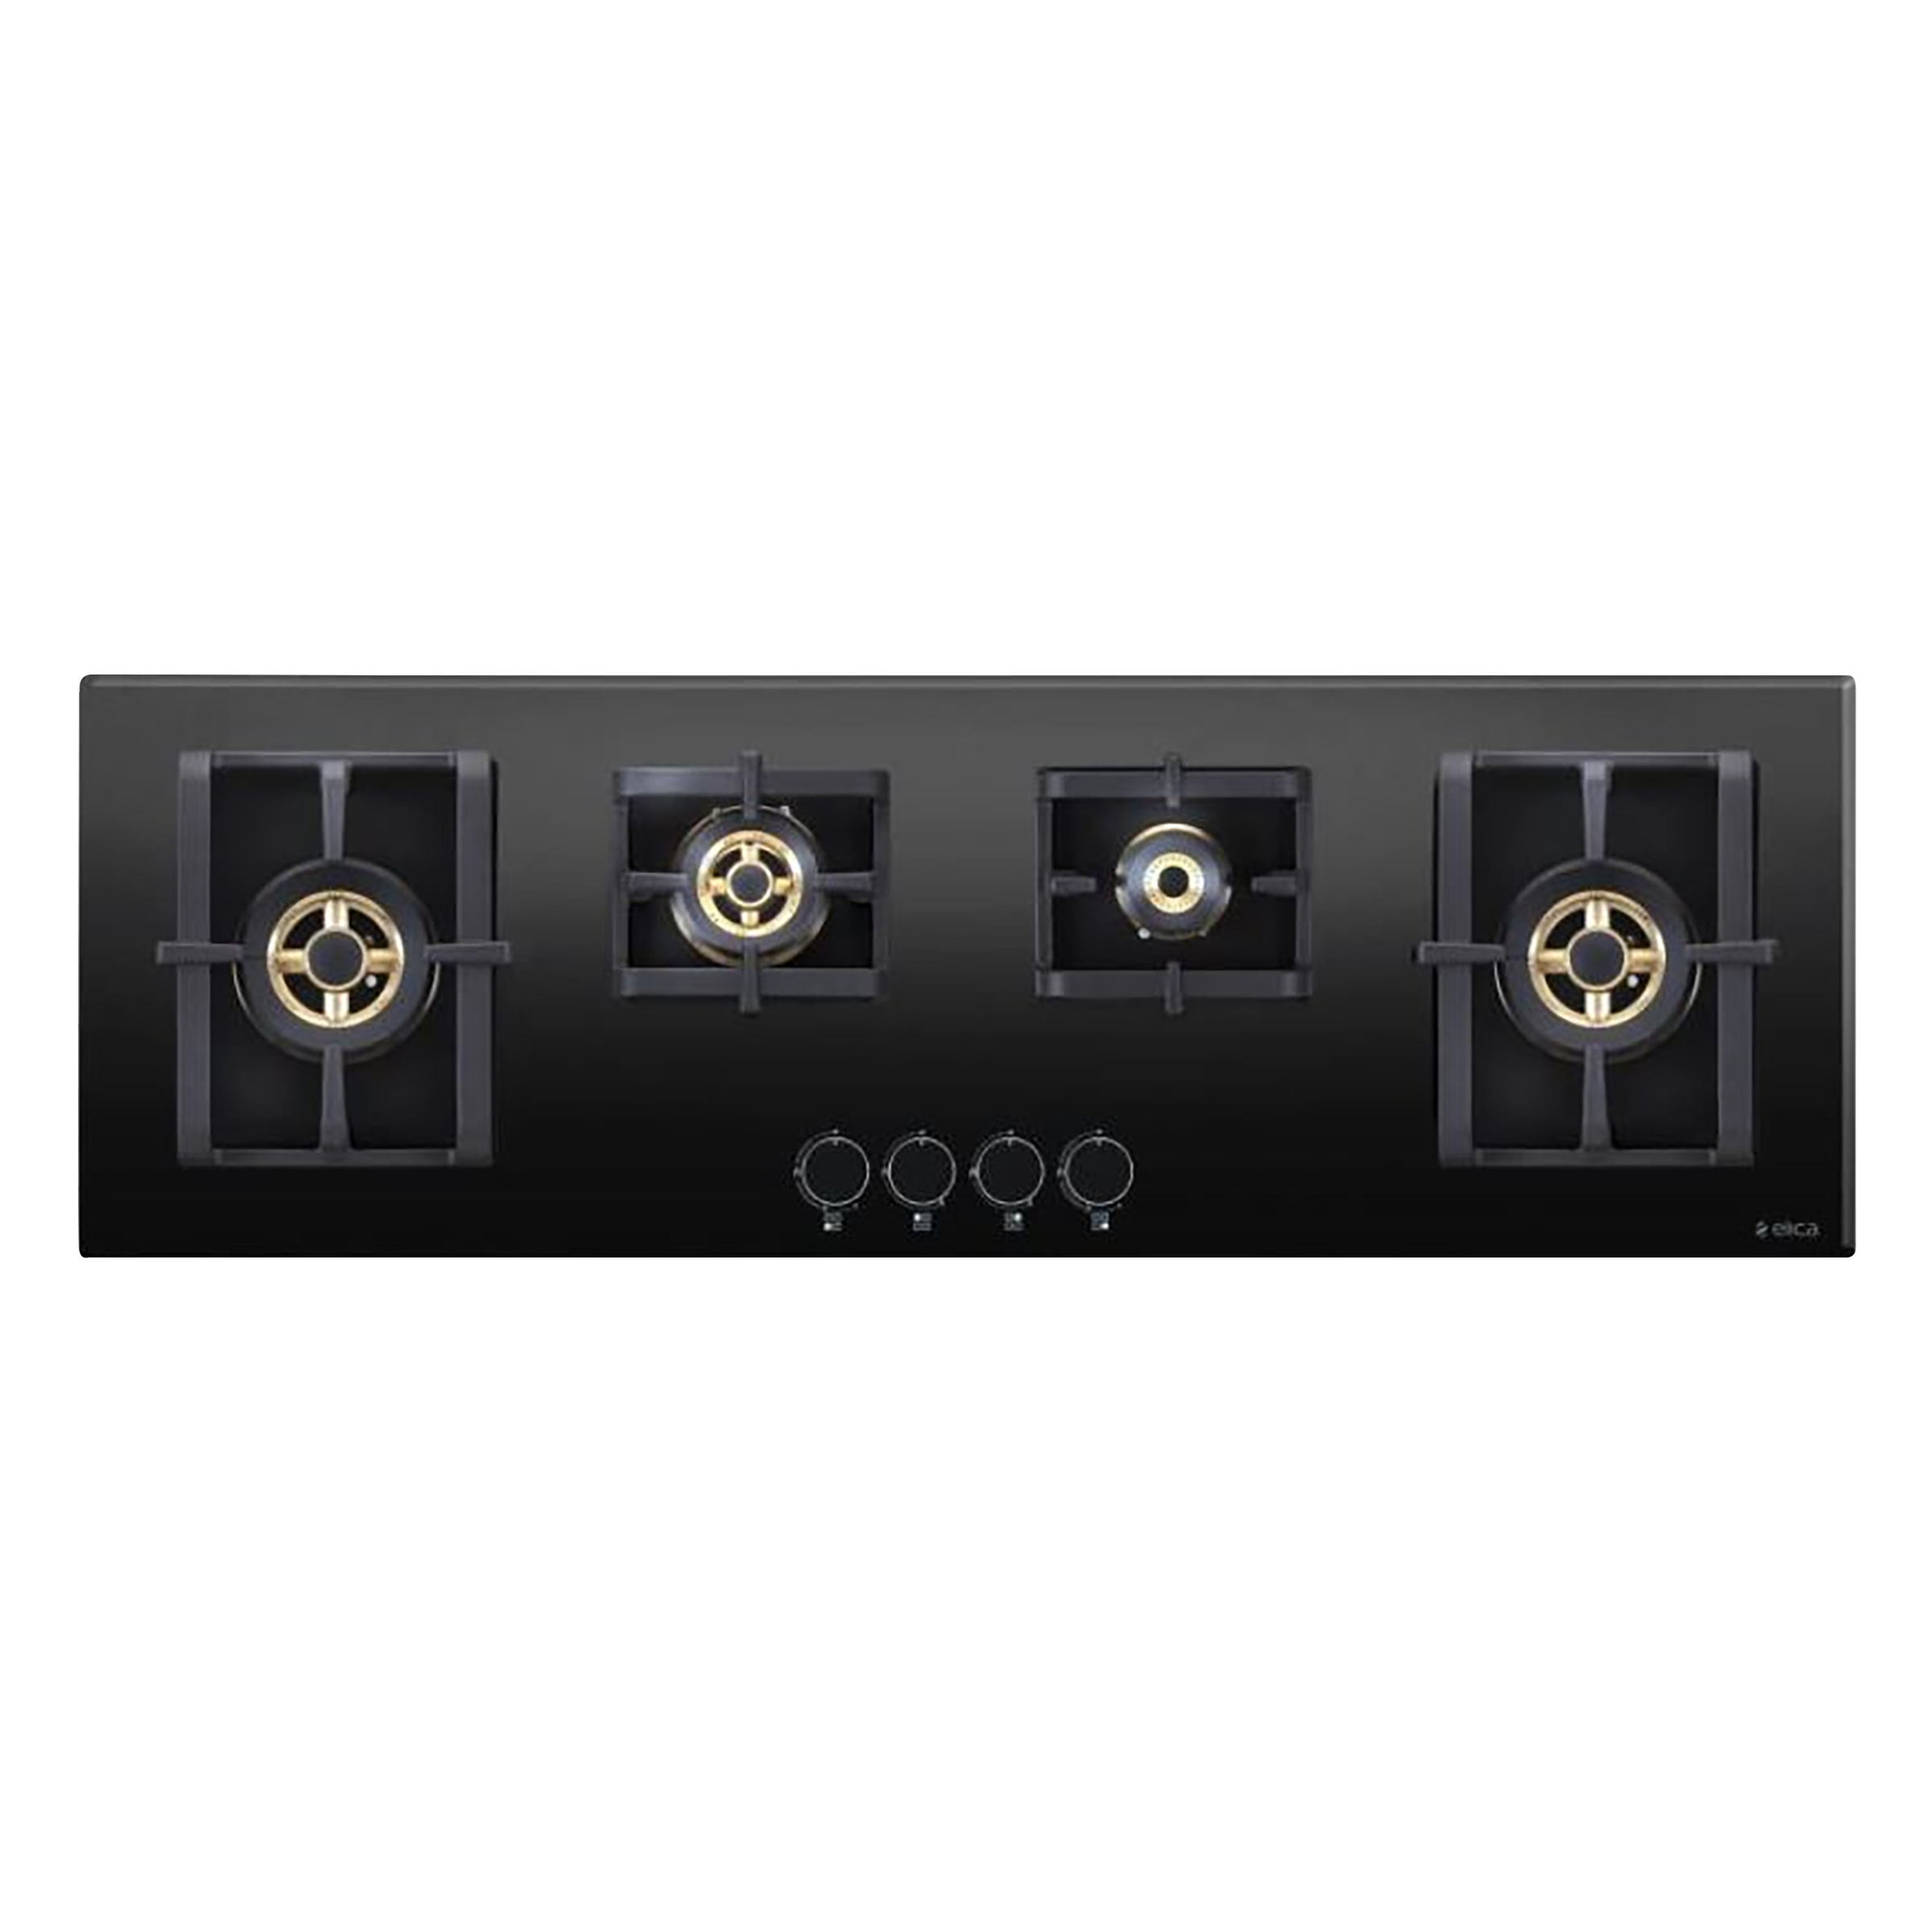 Elica Pro FB 4 Burner Glass Built-in Gas Hob (Electric Auto Ignition, 3148, Black)_1